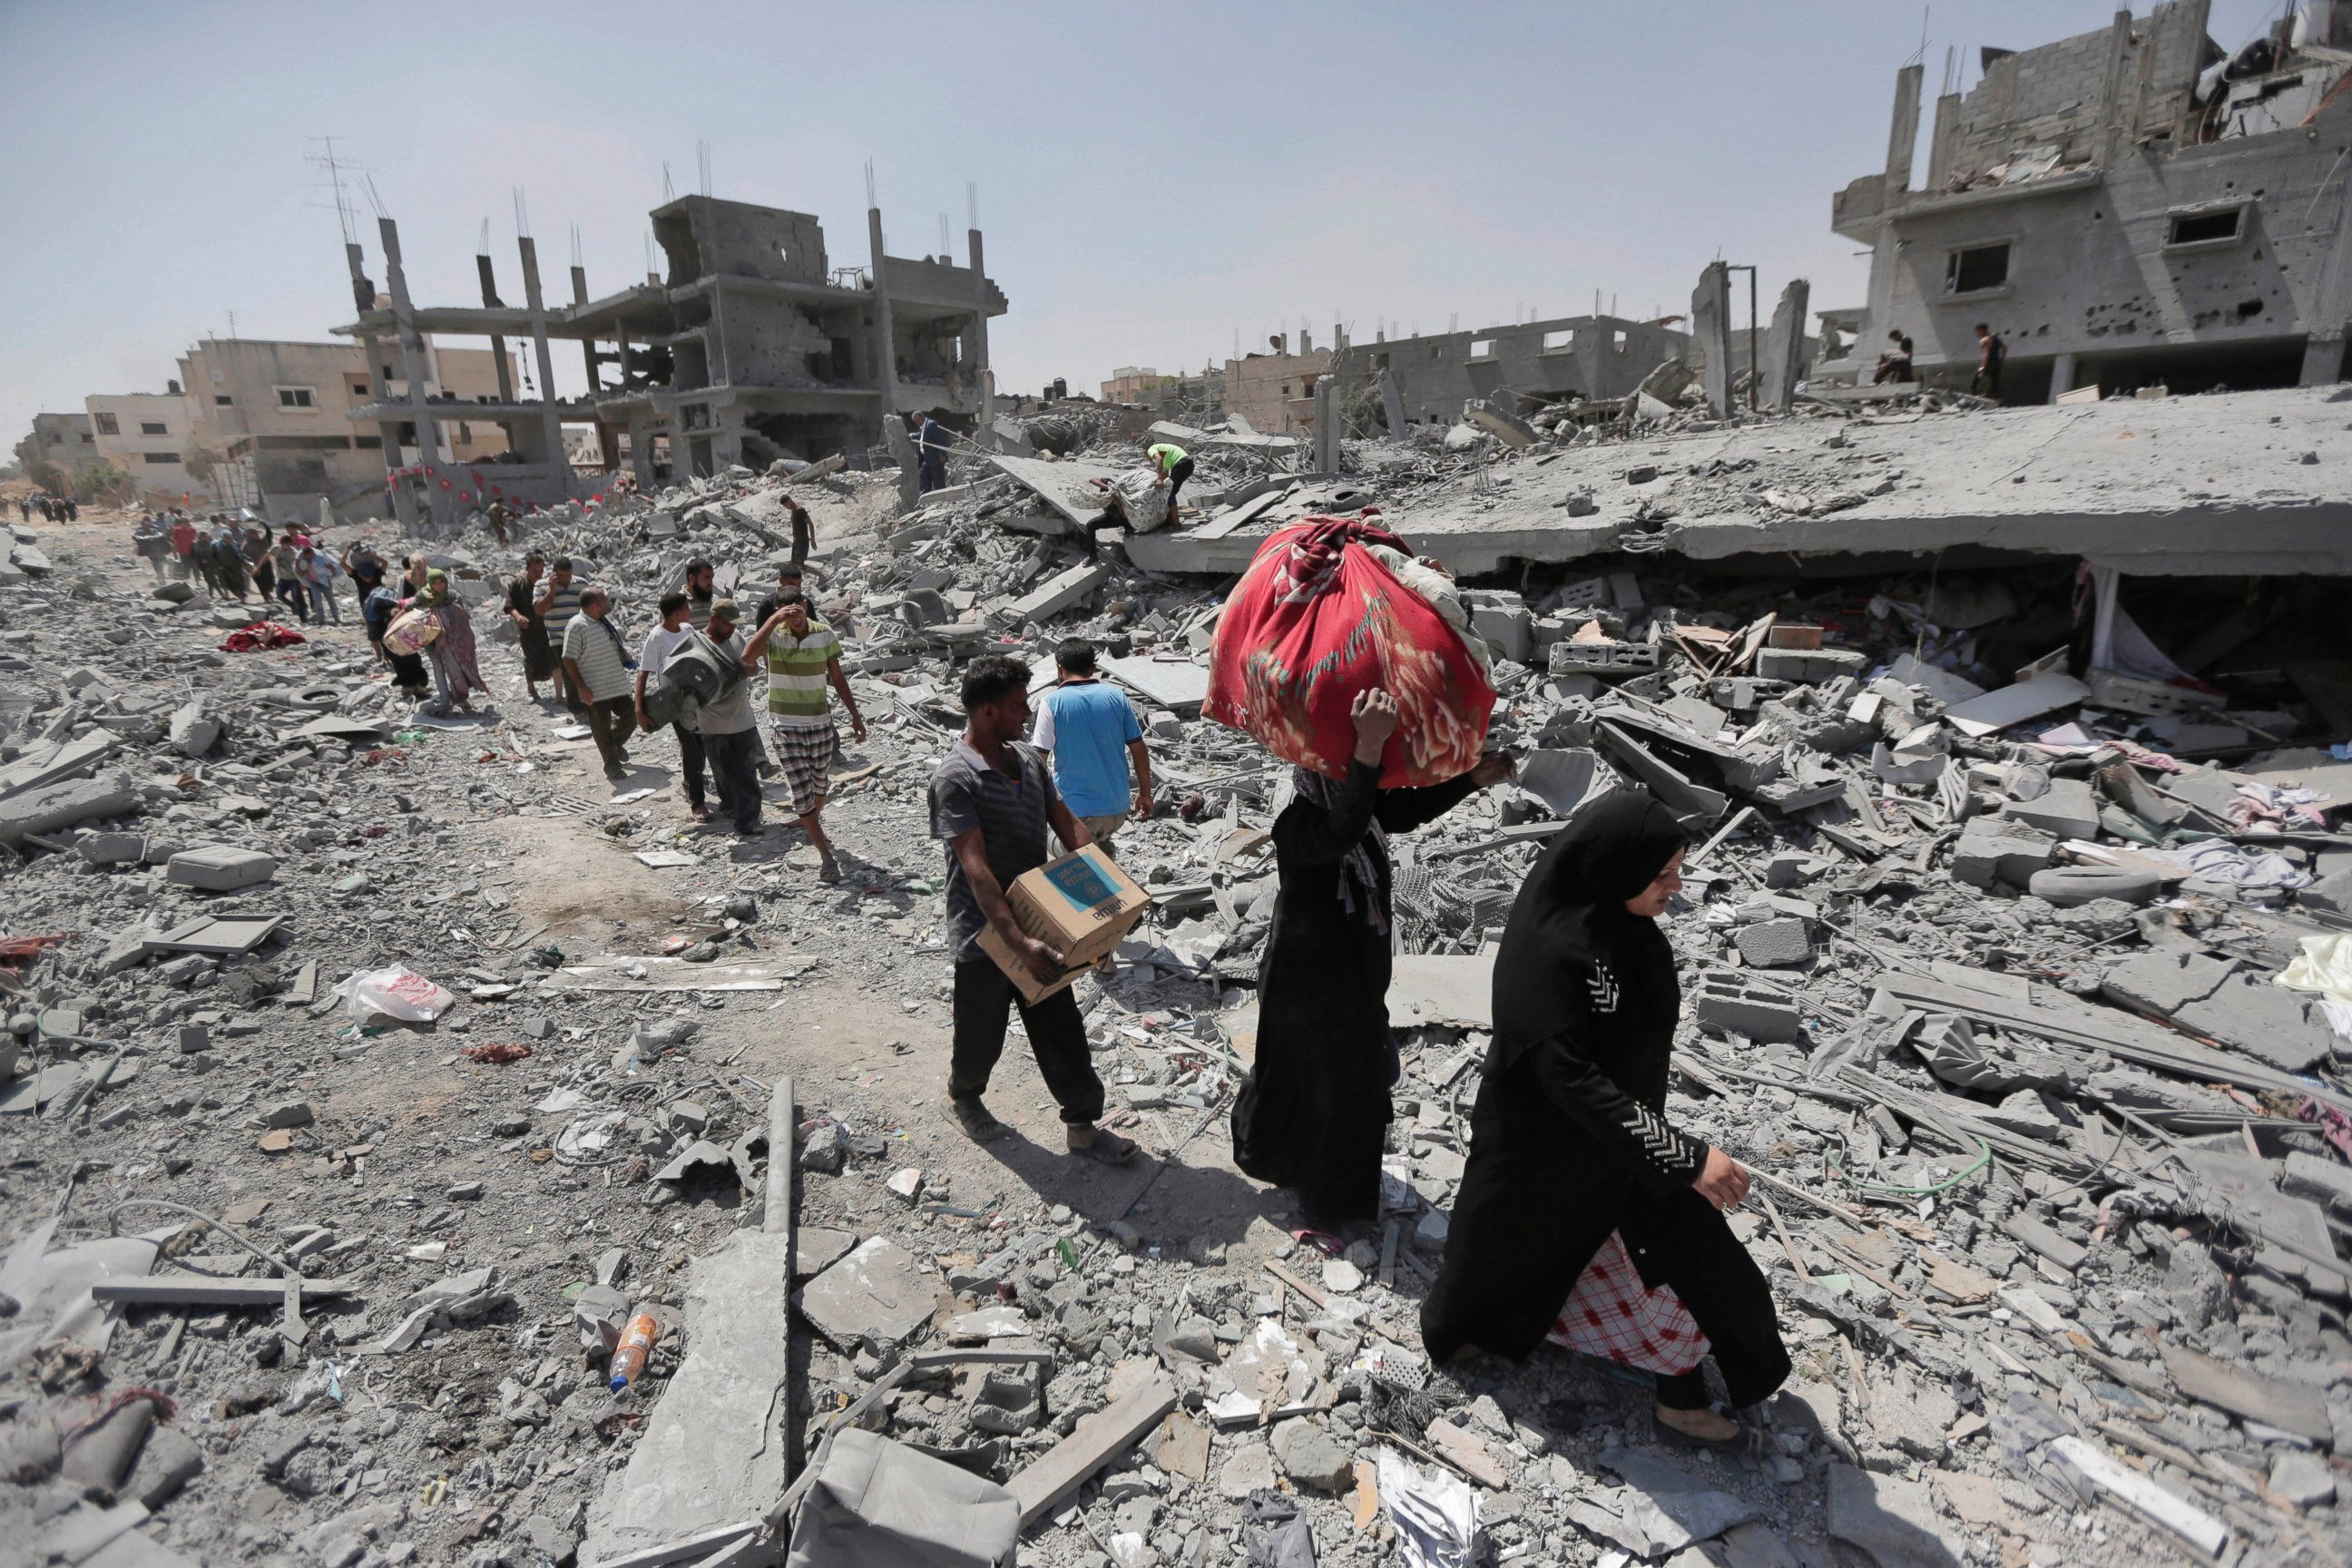 PHOTO: Palestinians carry their belongings after salvaging them from their destroyed houses in the town of Beit Hanoun, Gaza Strip, Aug. 1, 2014.